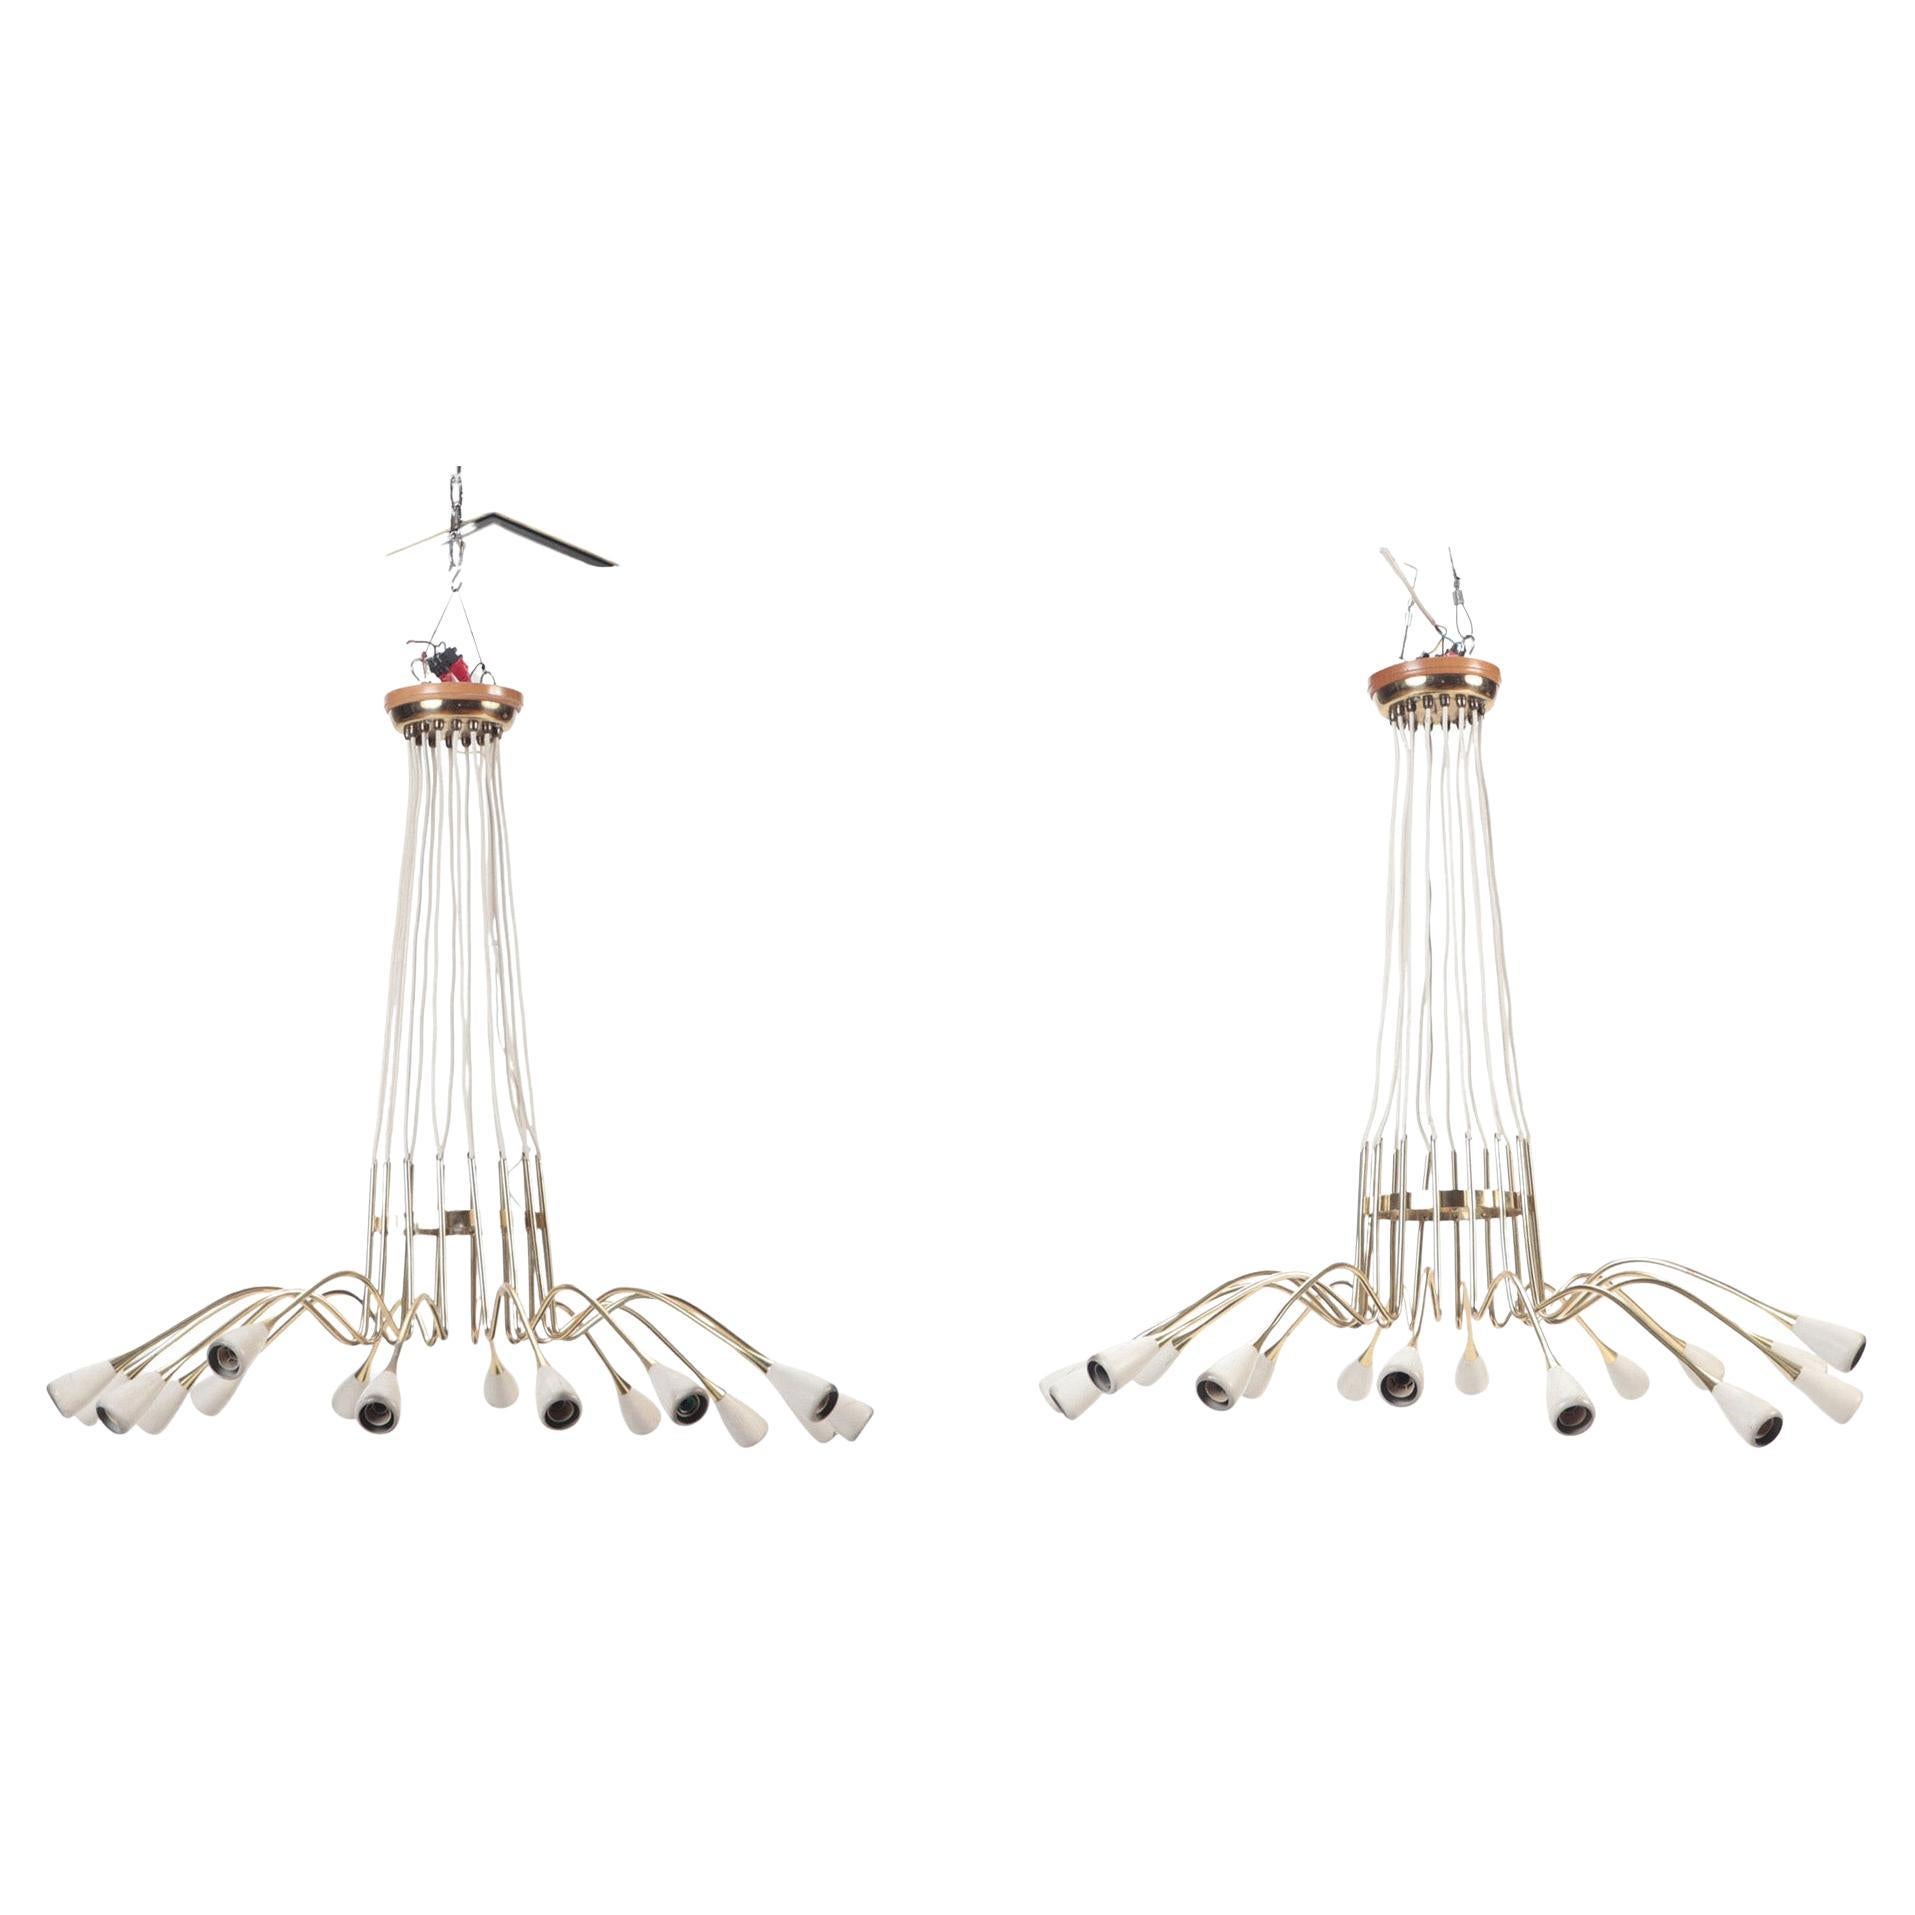 Pair of Italian Brass and Spun Aluminum 16 Arms Chandeliers, circa 1950 For Sale